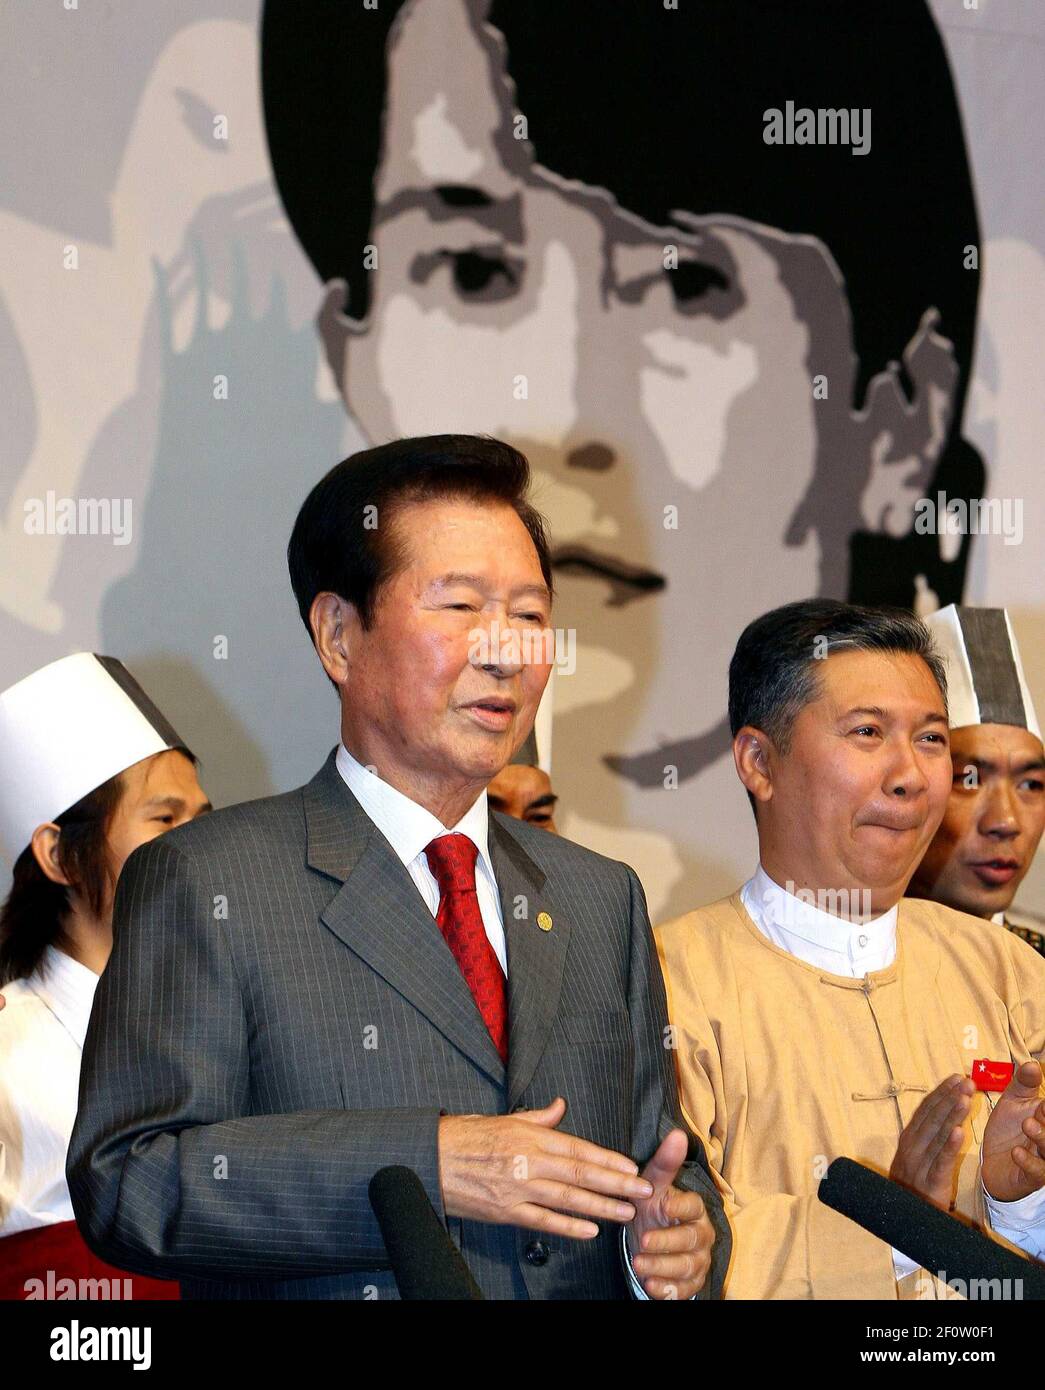 4 December 2007 - Seoul, South Korea - South Korean former president Kim Dae-jung, gives a speech in commemoration of the 7th anniversary of former president Kim Dae-jung's winning the 2000 nobel peace prize at 'A Night for Democracy in Burma'. Kim Dae-jung, supports Burma's Aung San Suu Kyi U.S $ 40,000 and democratization of Burma. Photo Credit: Youngho Lee/Sipa Press /0806301301 Stock Photo